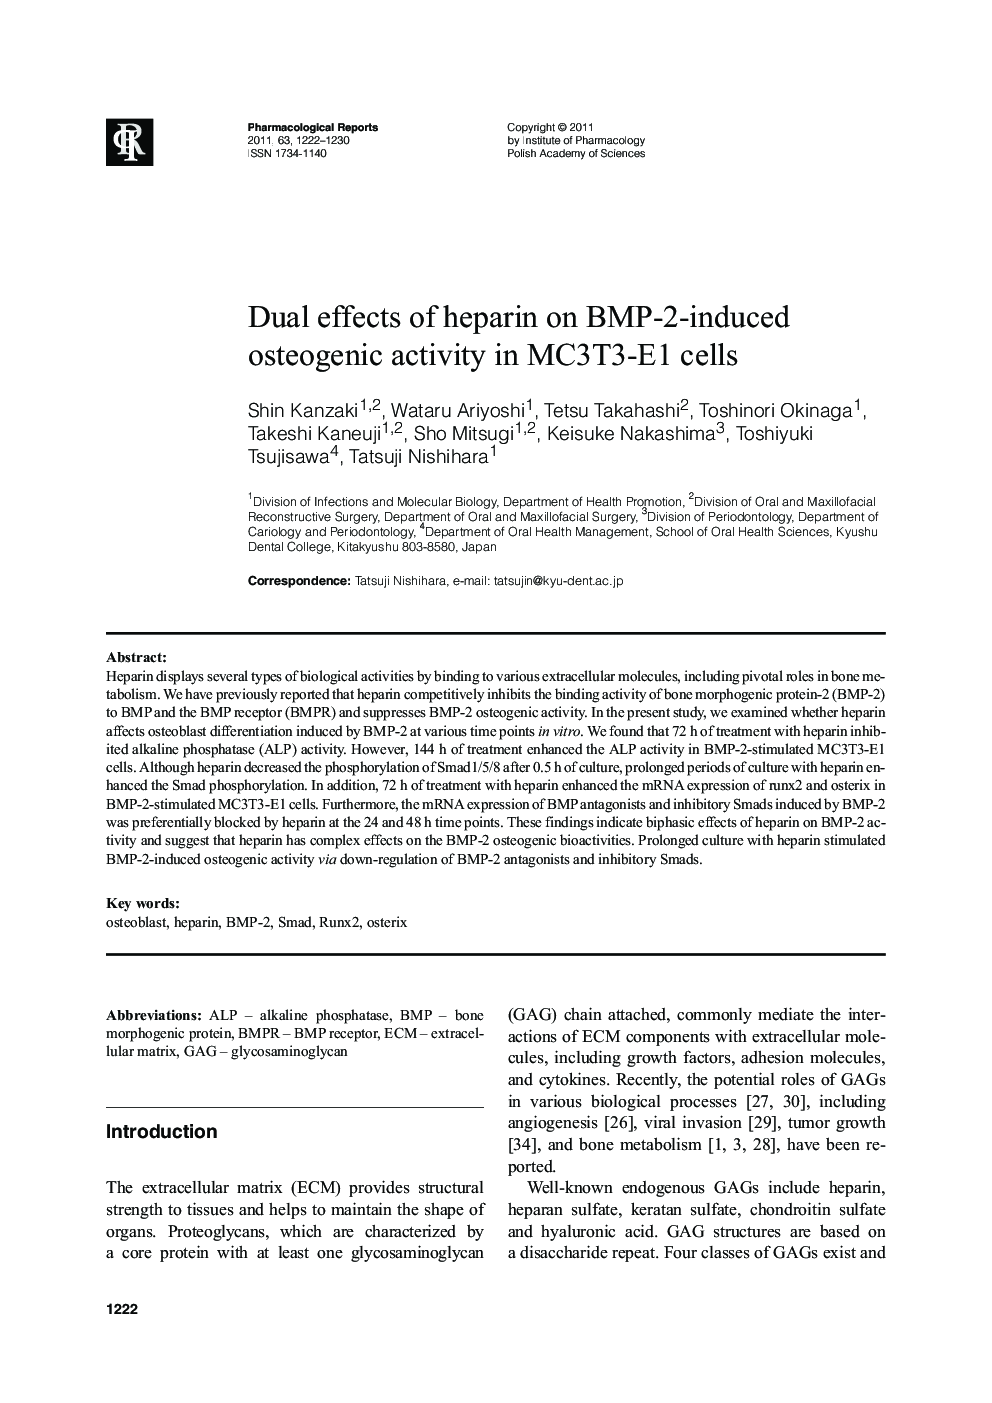 Dual effects of heparin on BMP-2-induced osteogenic activity in MC3T3-E1 cells